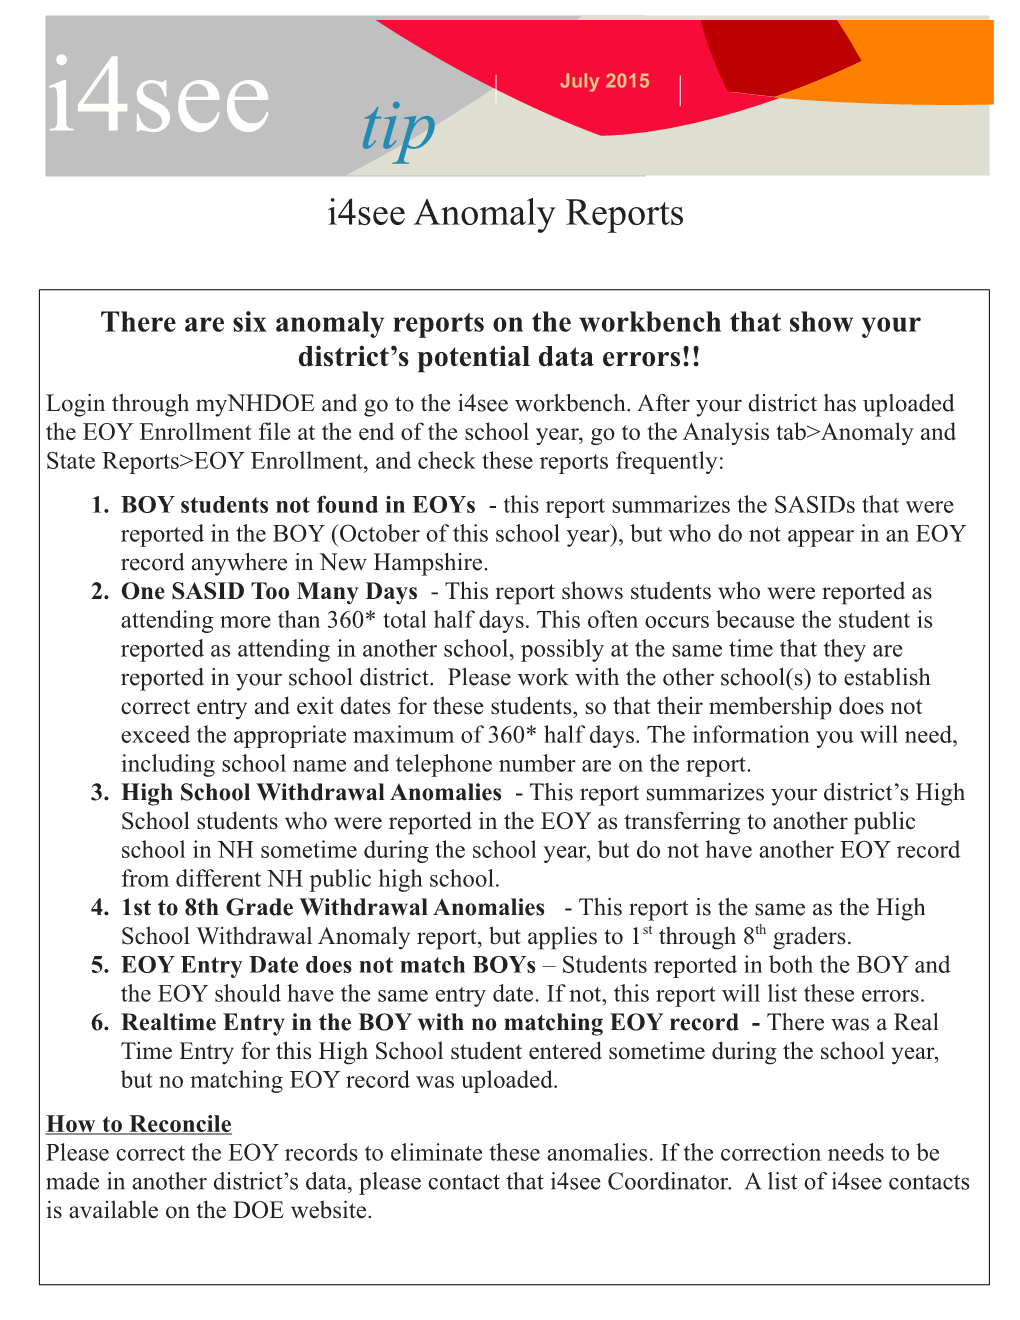 There Are Six Anomaly Reports on the Workbench That Show Your District S Potential Data Errors